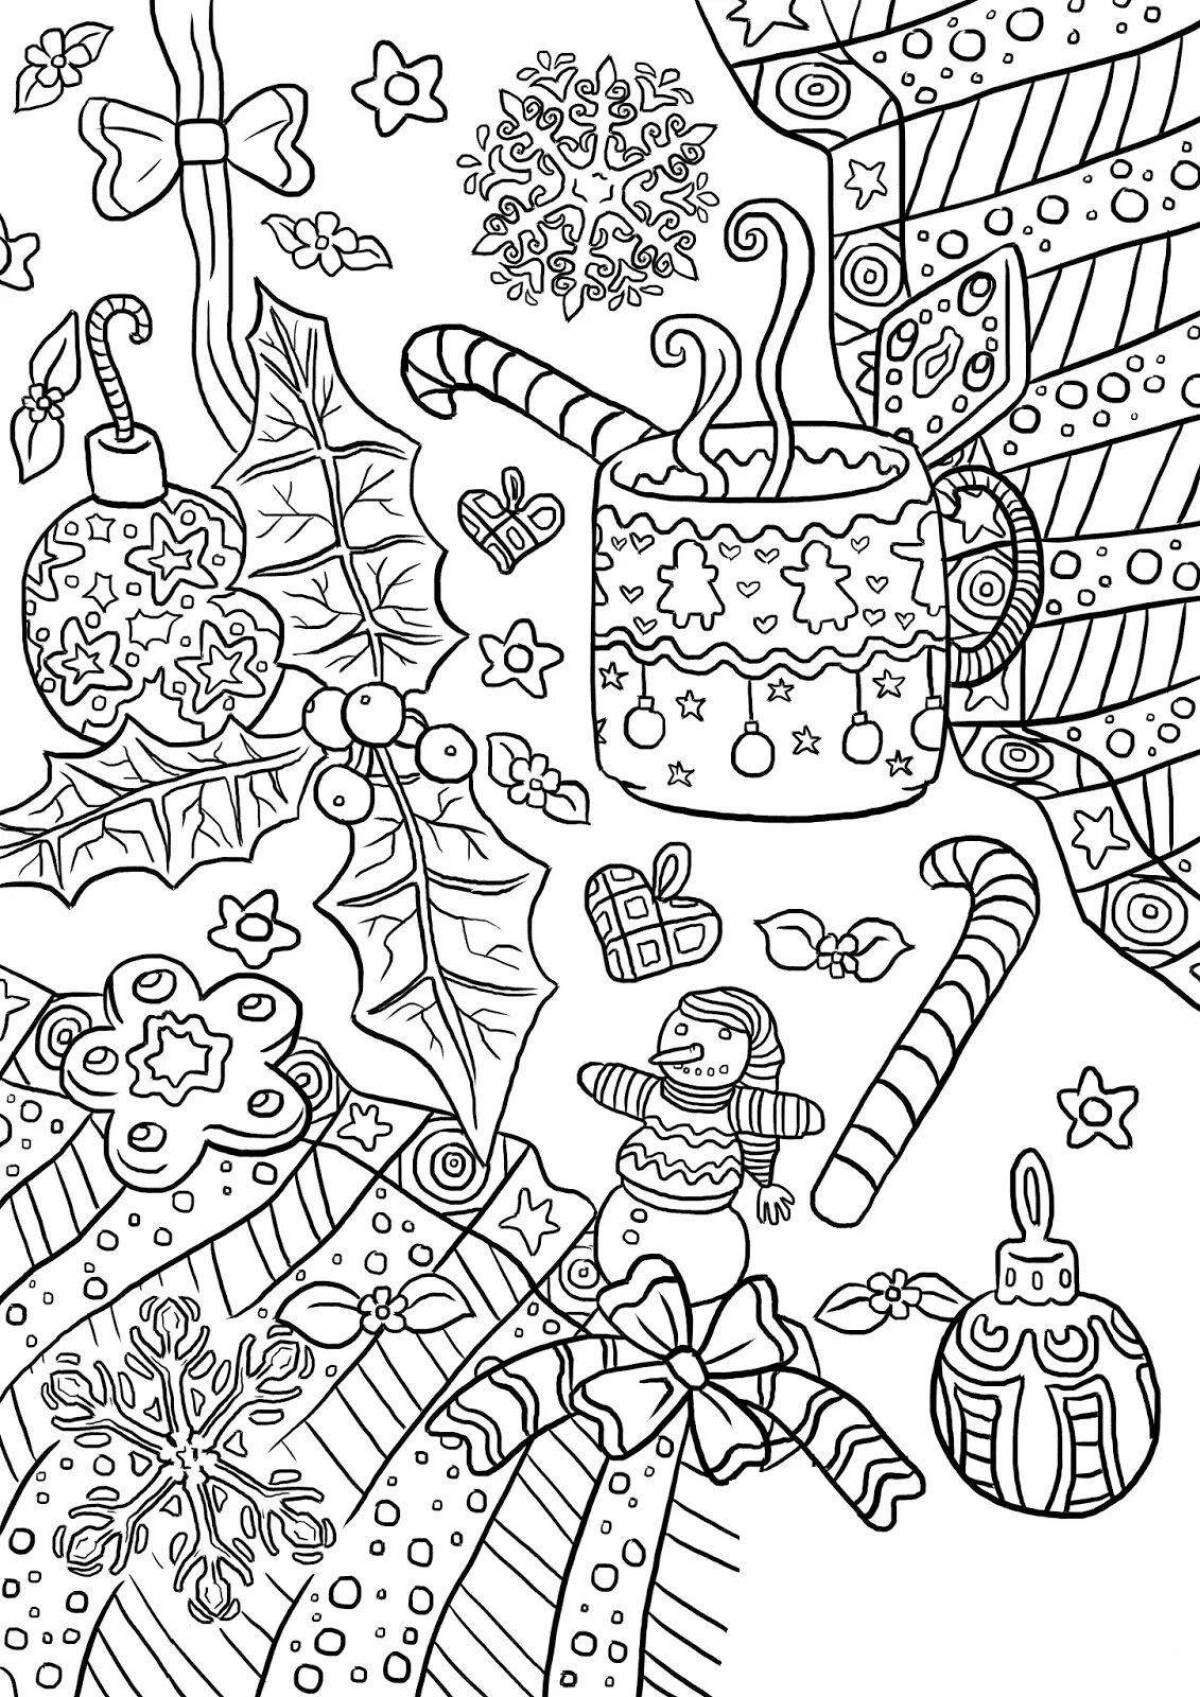 Serene coloring page anti-stress christmas